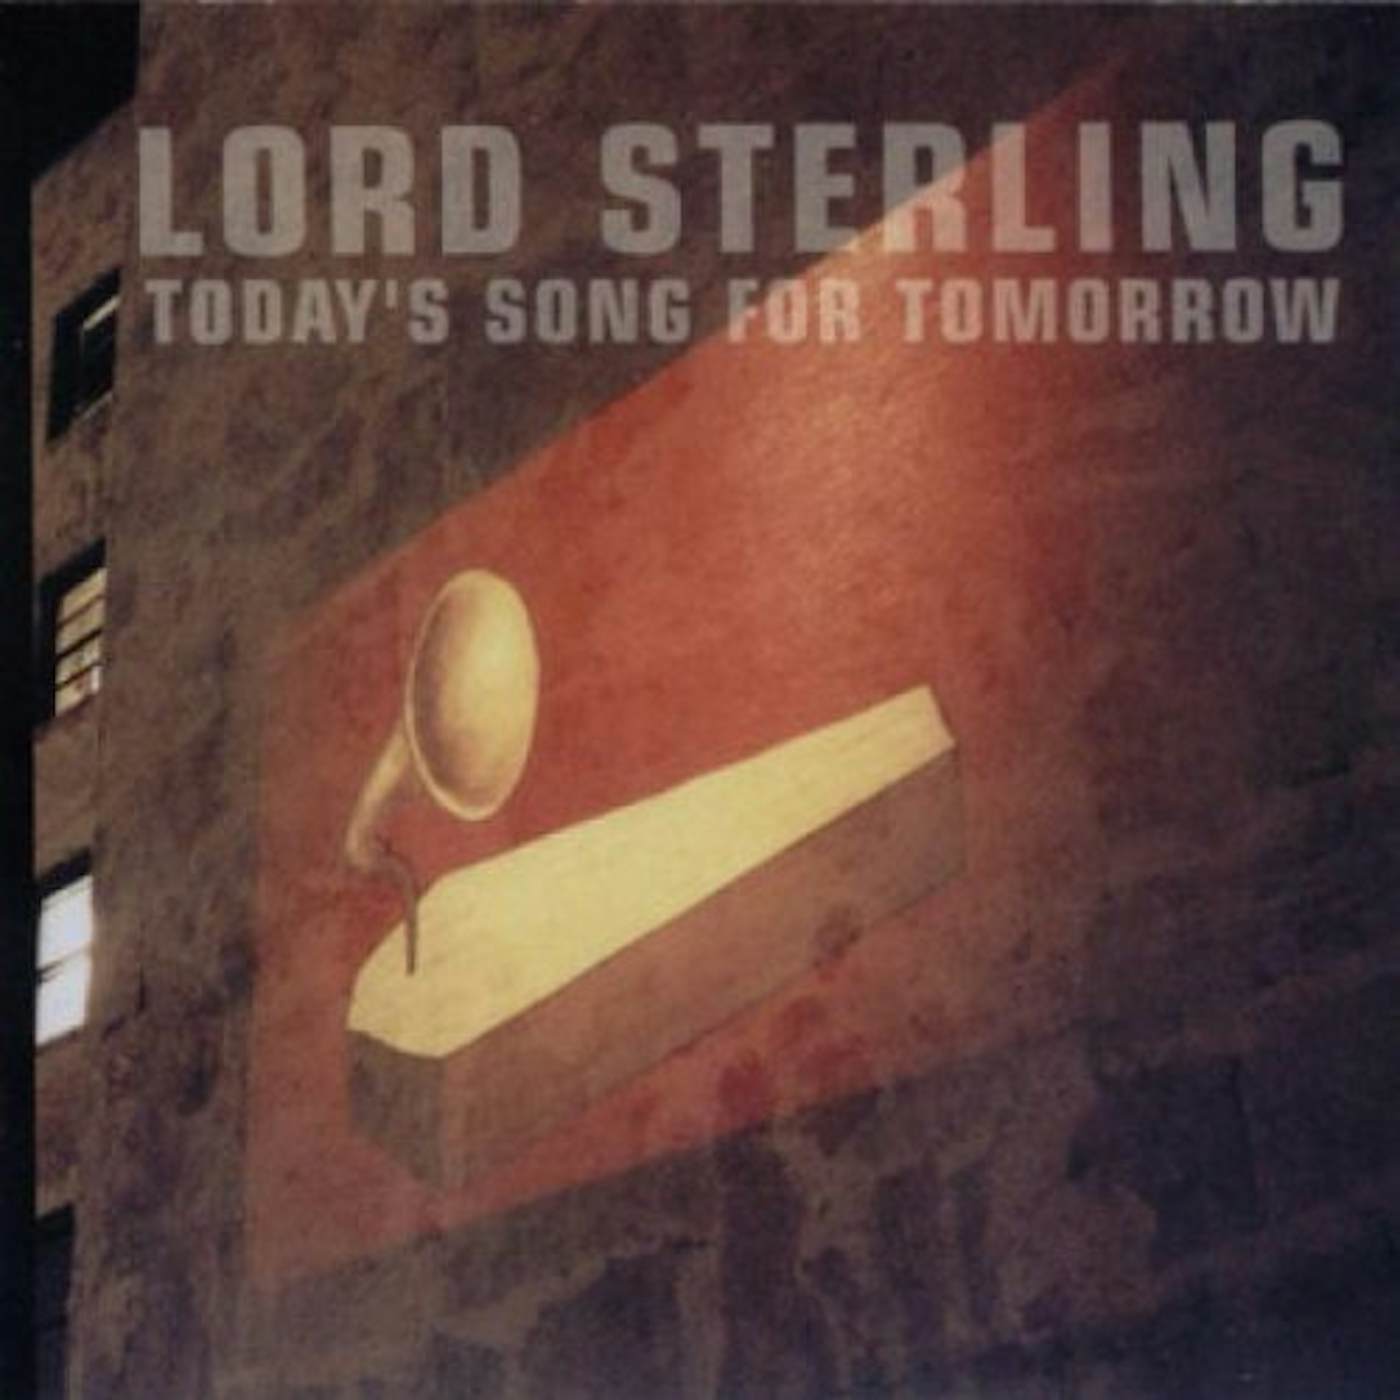 Lord Sterling TODAY'S SONG FOR TOMORROW CD